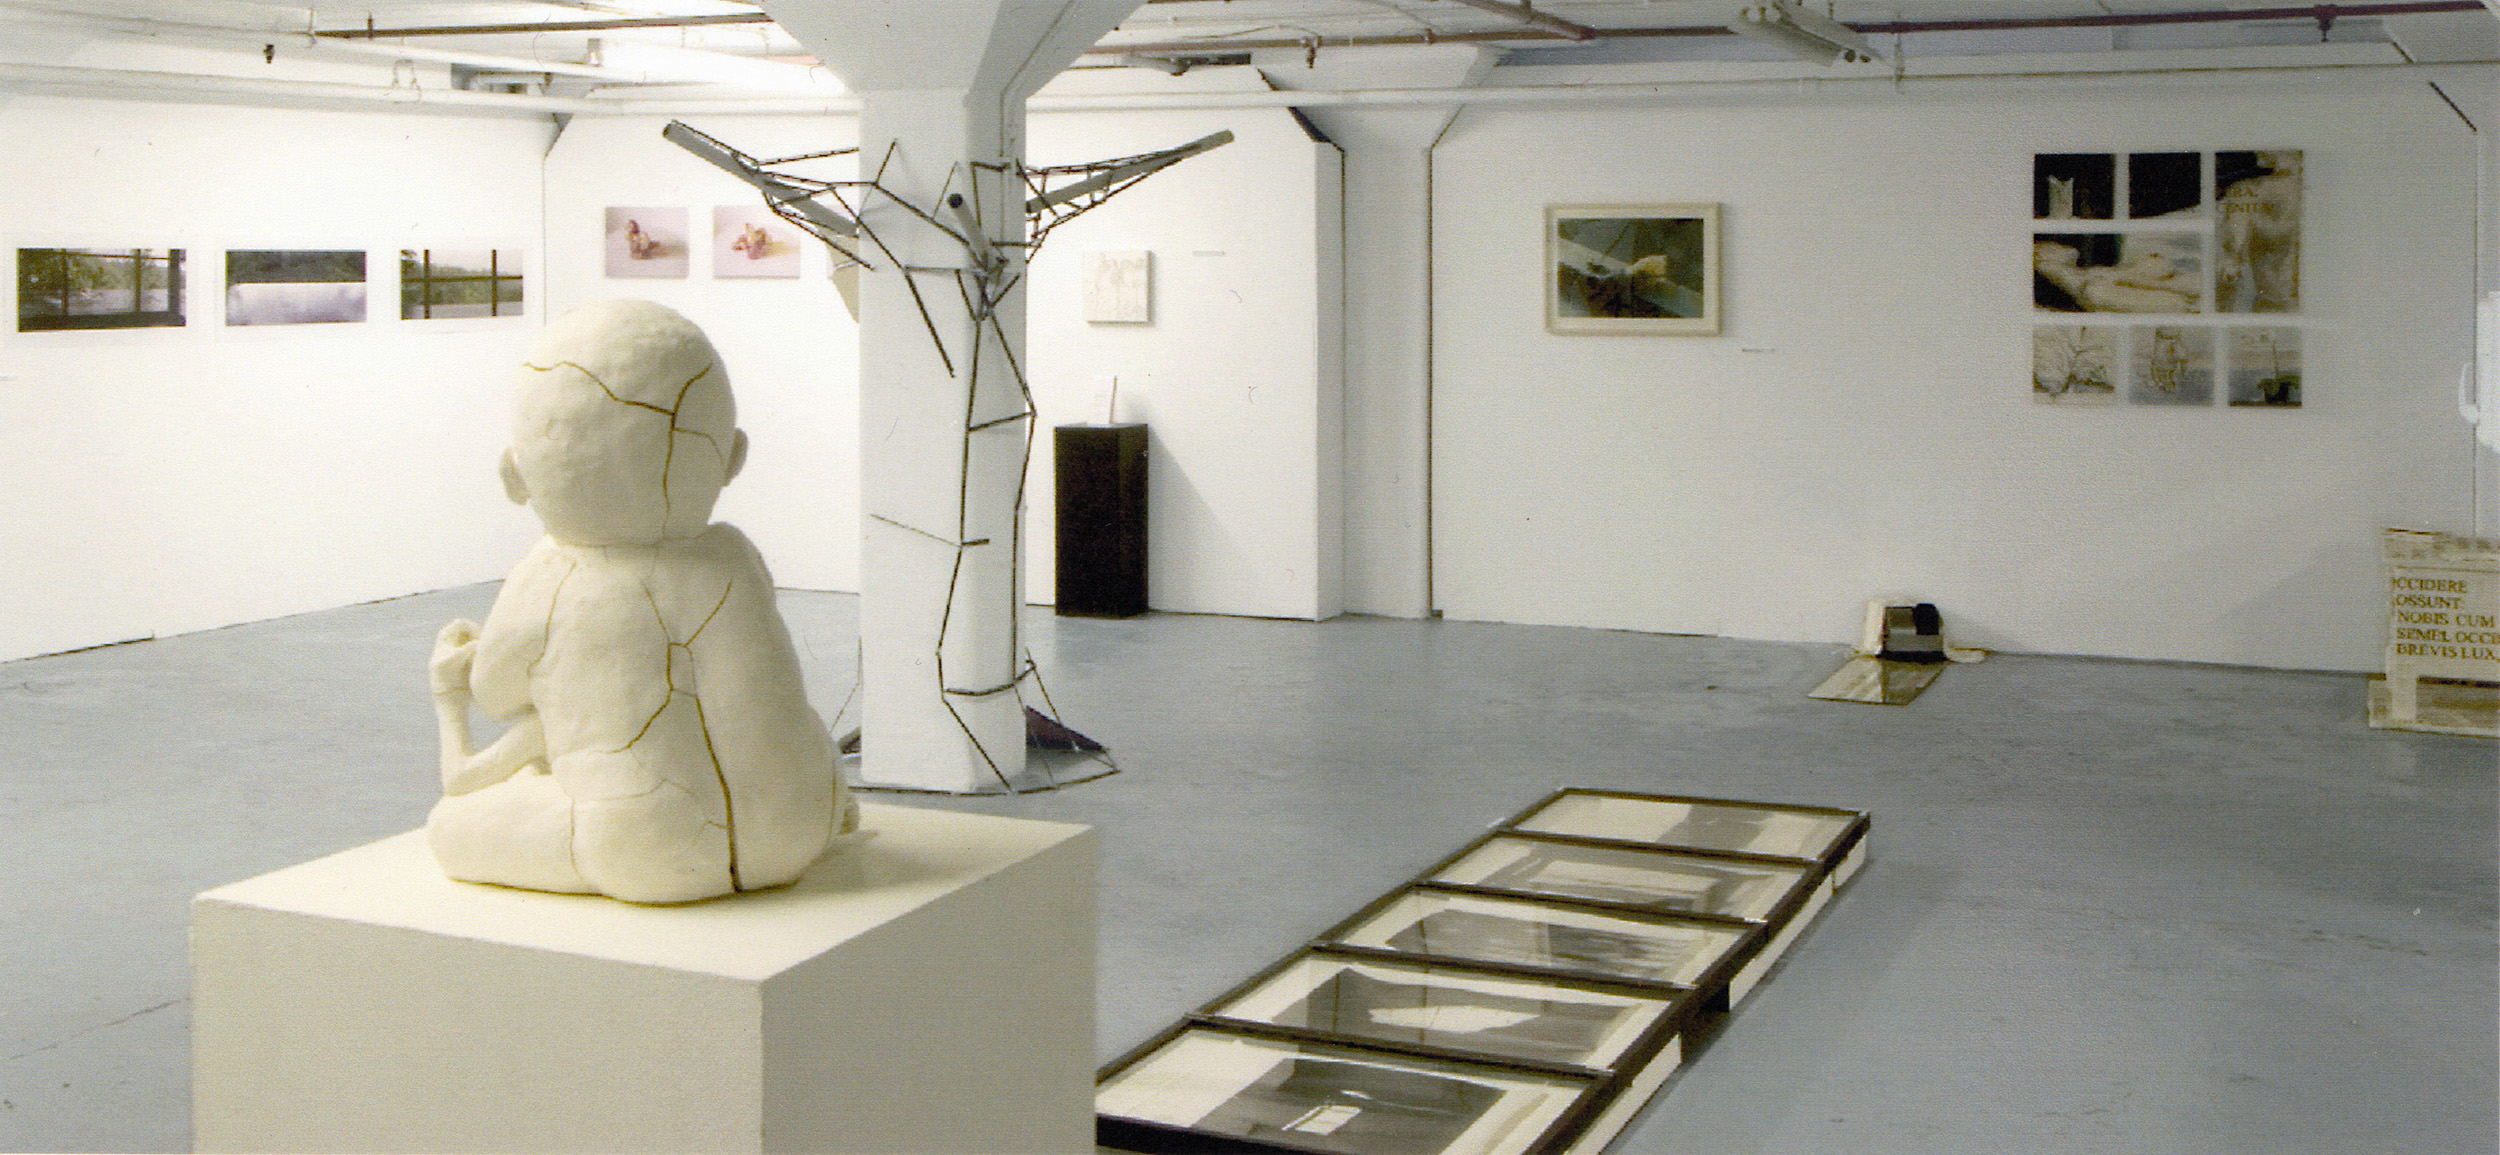 Photograph of art exhibition with artwork on the walls, floor and free standing plinths. There is a sculpture of a cracked plaster baby in the foreground, some photographs in glass boxes on the floor, and other artwork.